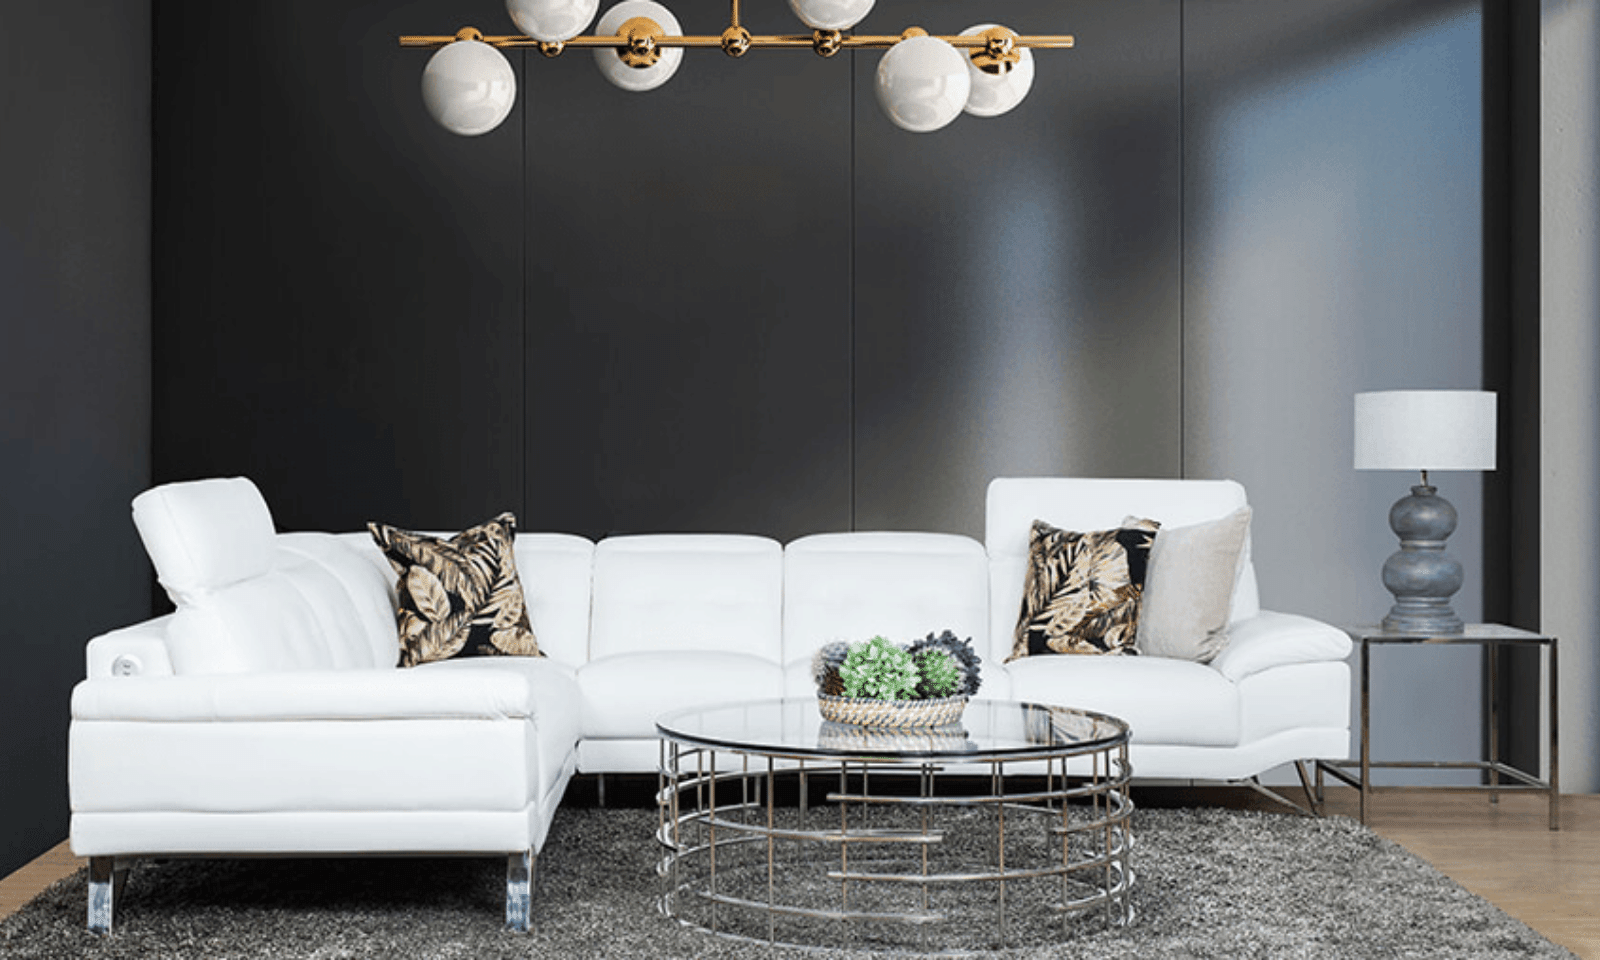 WHY THE SAN PABLO LEATHER CORNER SOFA IS IDEAL FOR GLAMOROUS LIVING ROOMS